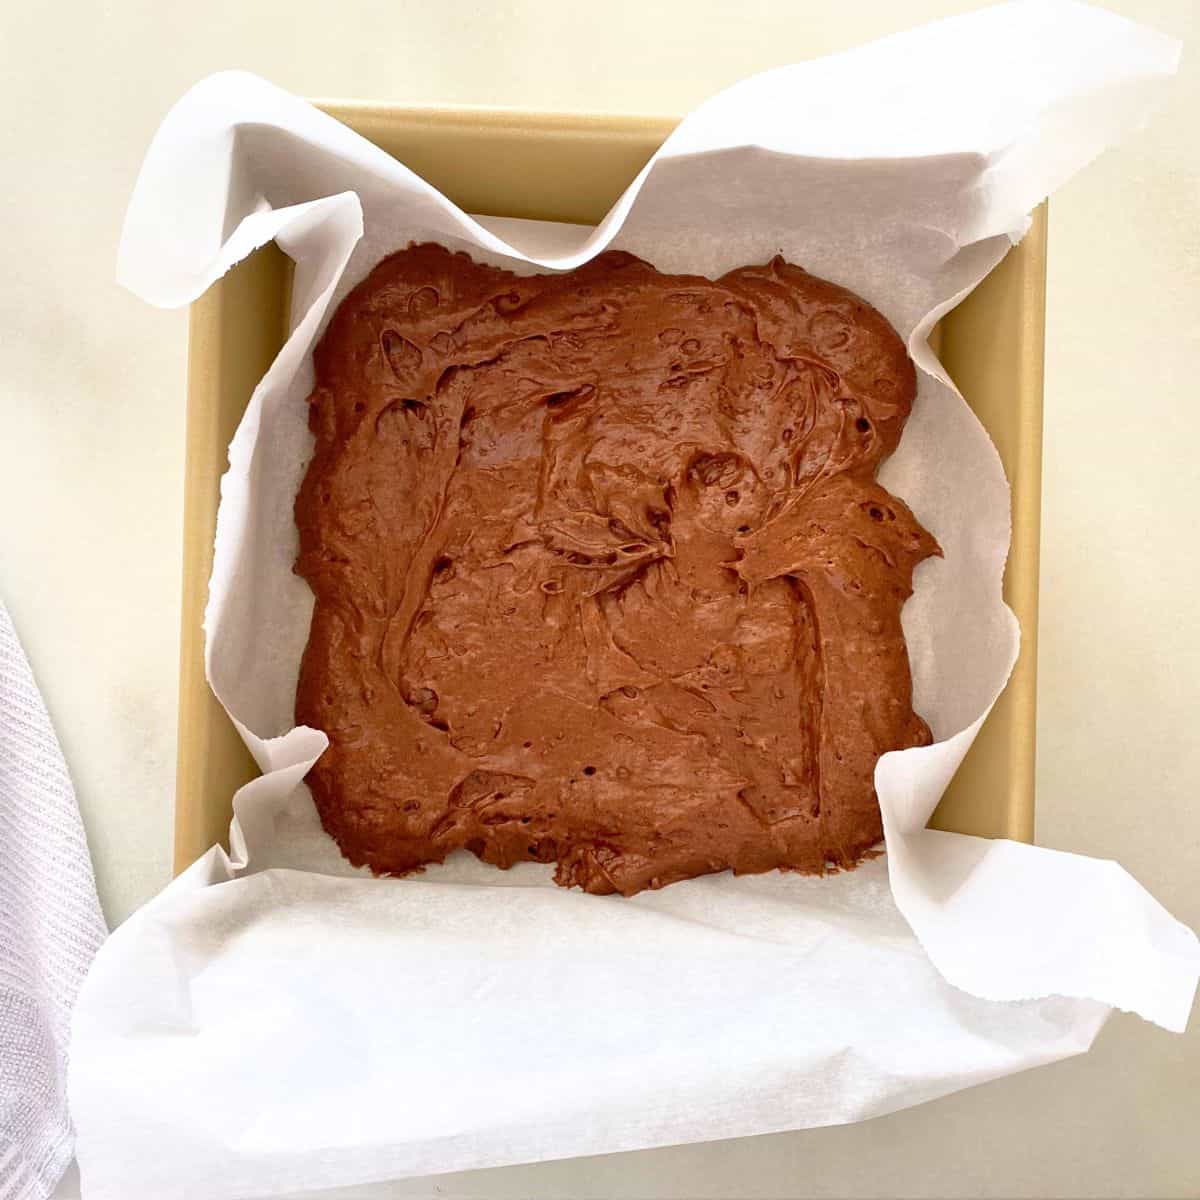 Uncooked brownie batter in a gold baking pan lined with parchment paper